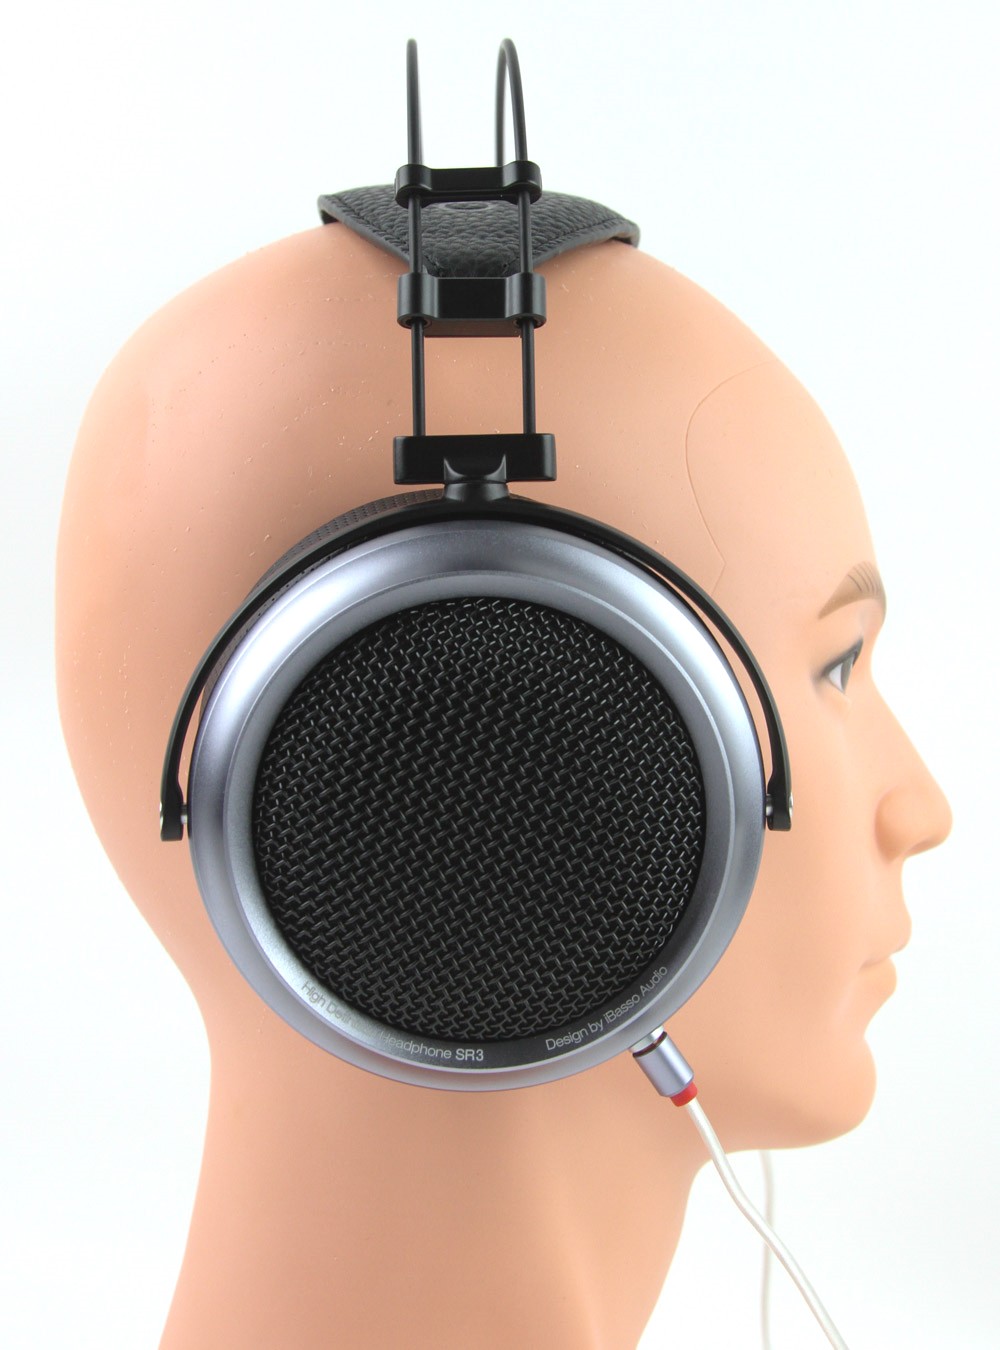 iBasso SR3 Open-Back Dynamic Driver Headphones Review - Fit